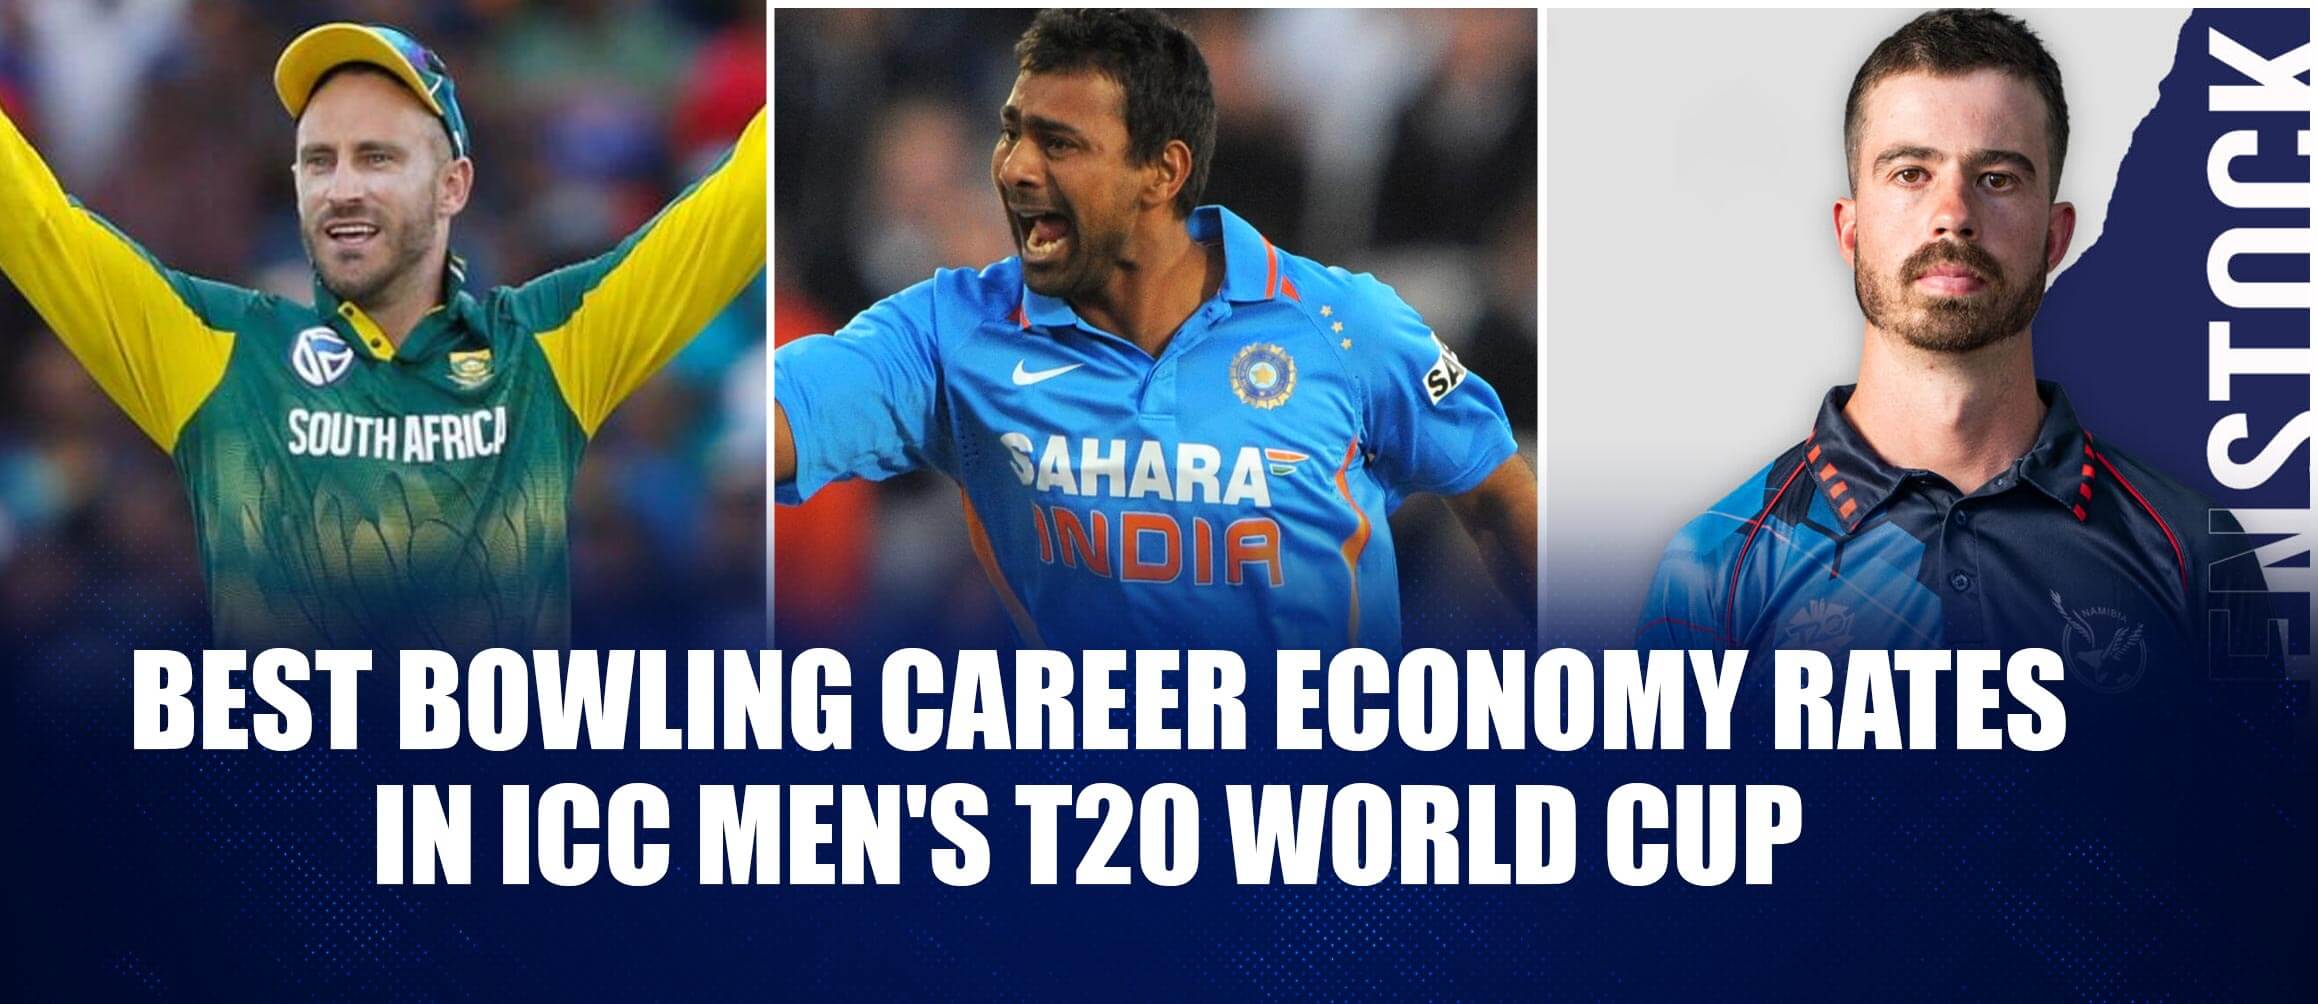 Best bowling career economy rates in ICC Men’s T20 World Cup